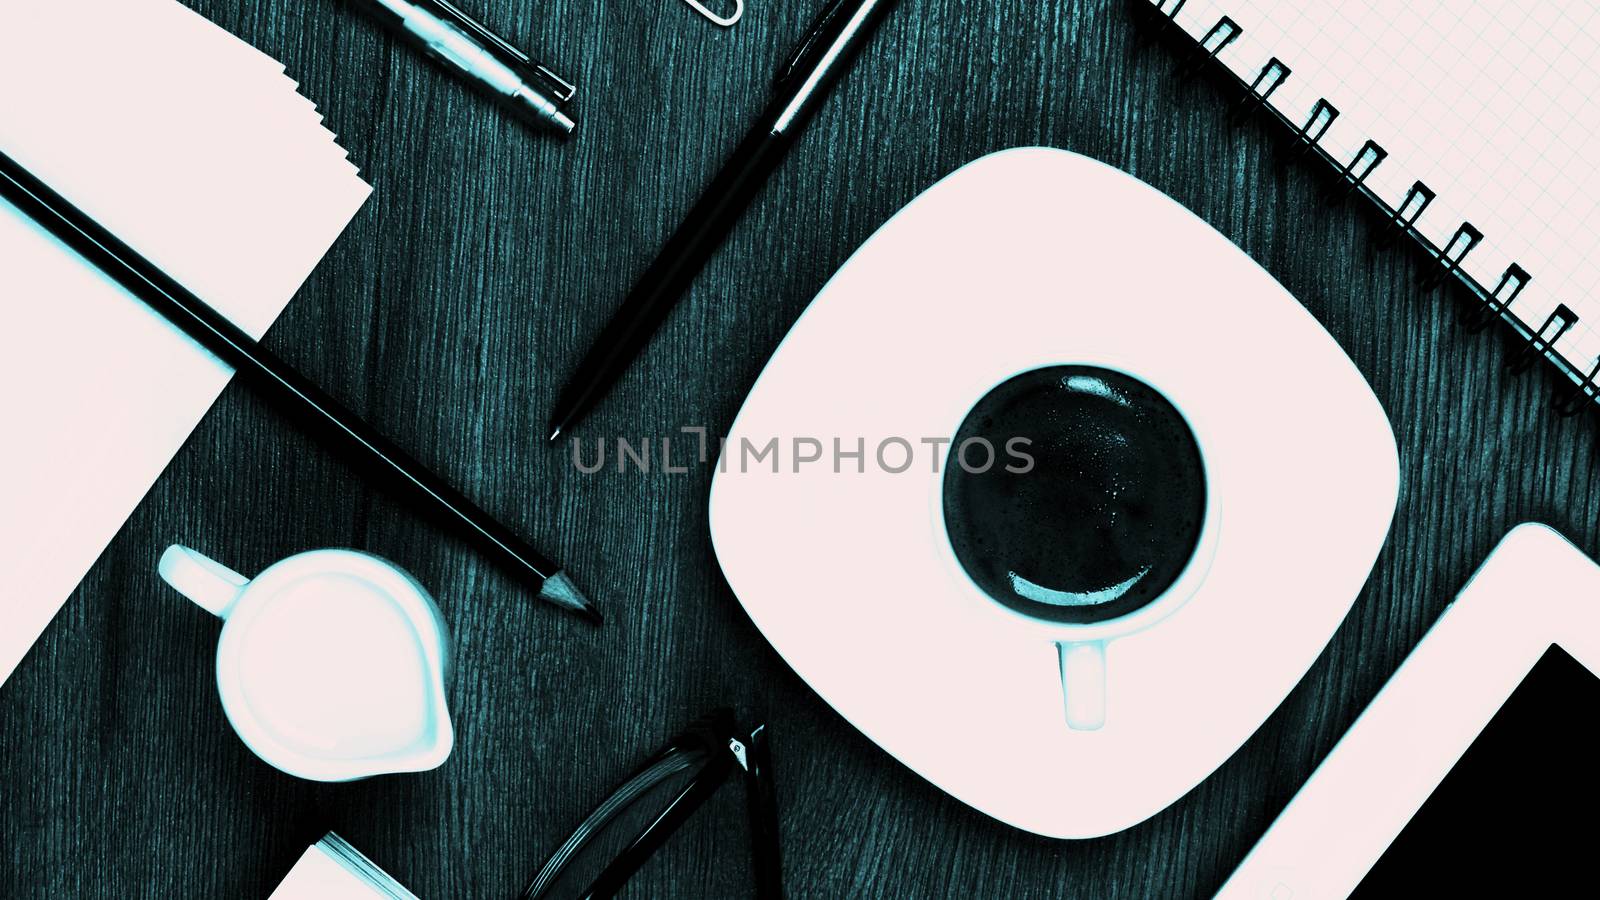 Coffee Break Concept with Stationery Items, Coffee Cup with Milk Jug, Digital Tablet and Greens Eyeglasses closeup on Wooden background. Turquoise toned